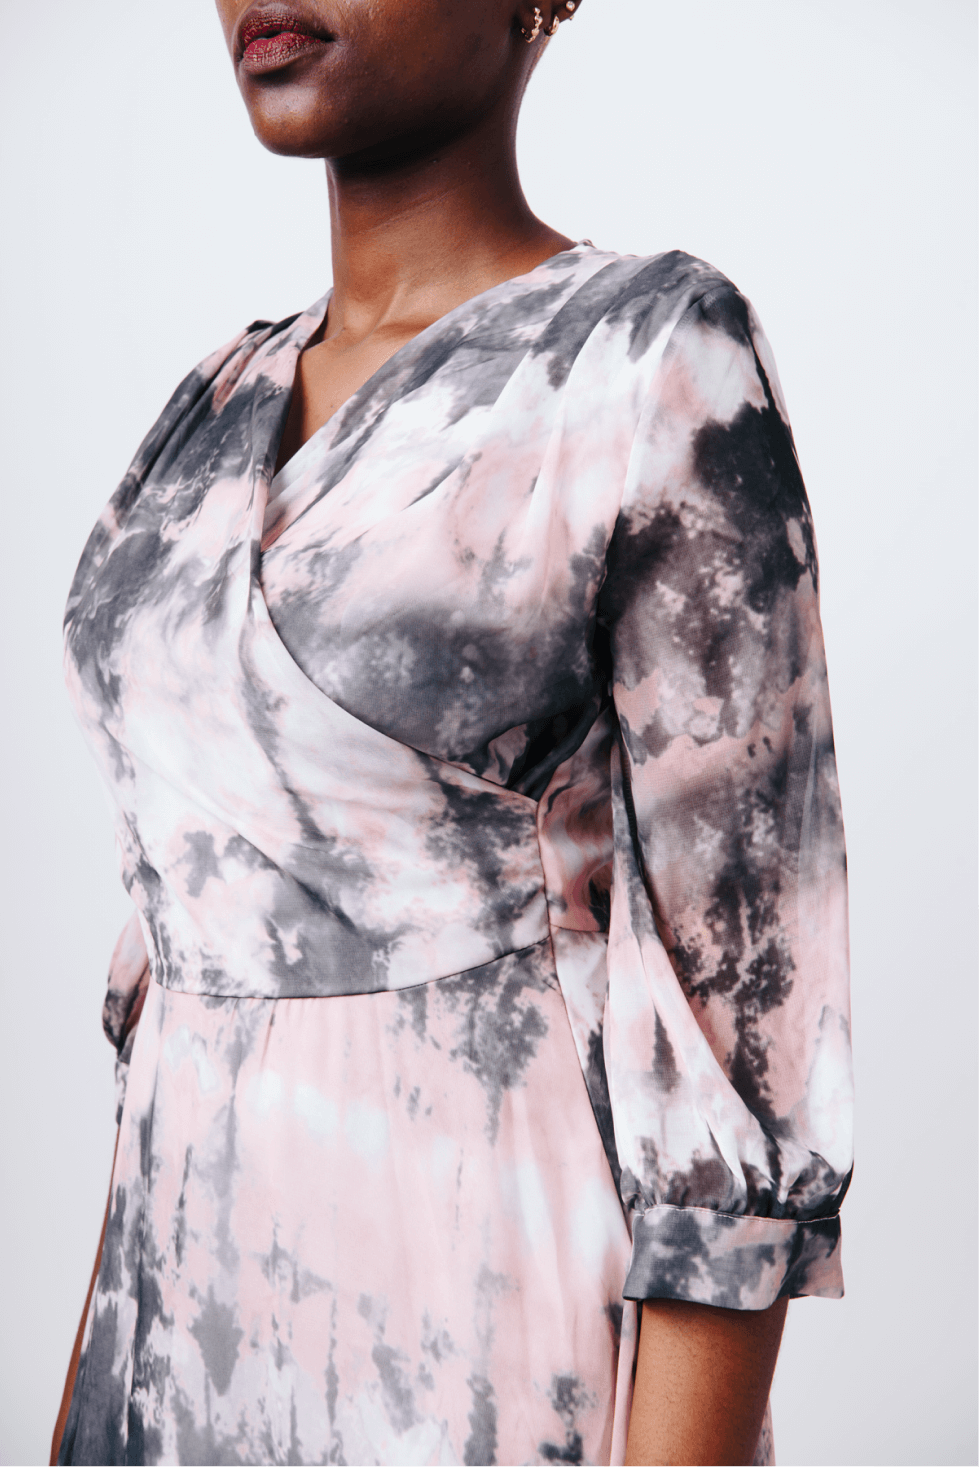 Shop Tie Dye Effect Wrap Dress by The Fashion Frenzy on Arrai. Discover stylish, affordable clothing, jewelry, handbags and unique handmade pieces from top Kenyan & African fashion brands prioritising sustainability and quality craftsmanship.